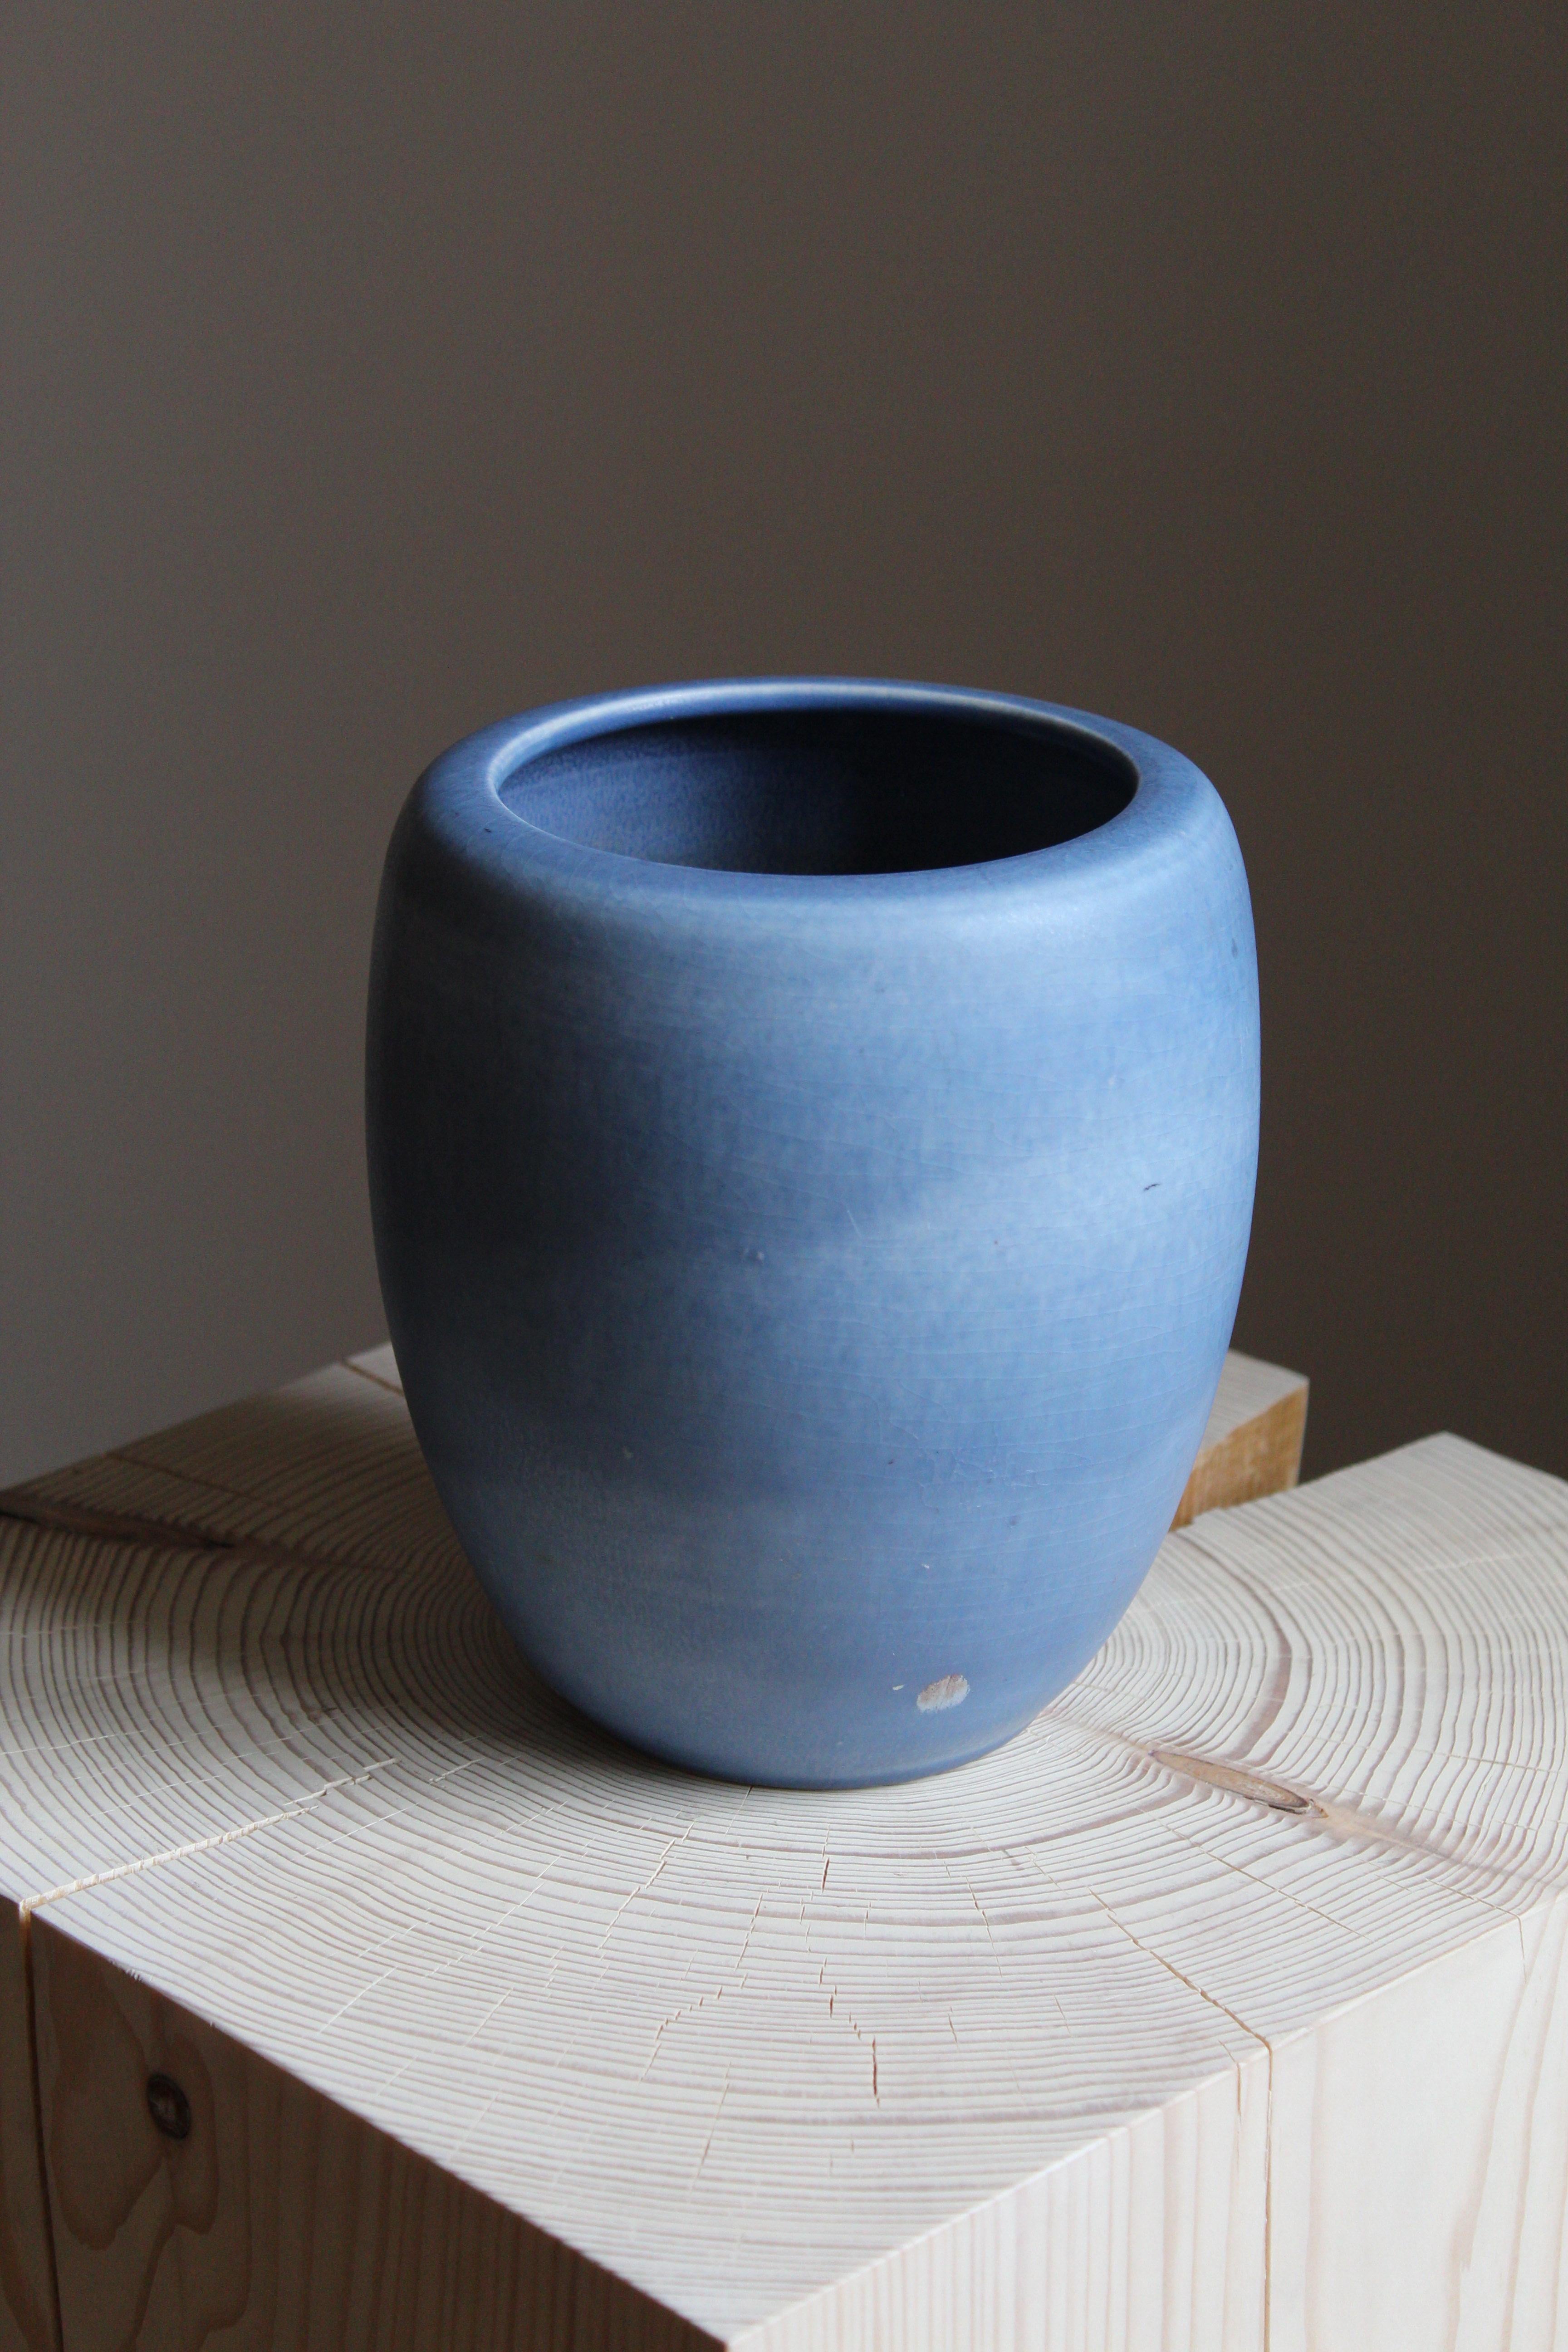 A vase, designed by Getrud Lönegren. Produced by Rörstrand. Stamped. Features blue glaze with subtle detailing. 

Other designers of the period include WIlhelm Kåge, Stig Lindberg, Axel Salto, Arne Bang, and Gunnar Nylund.